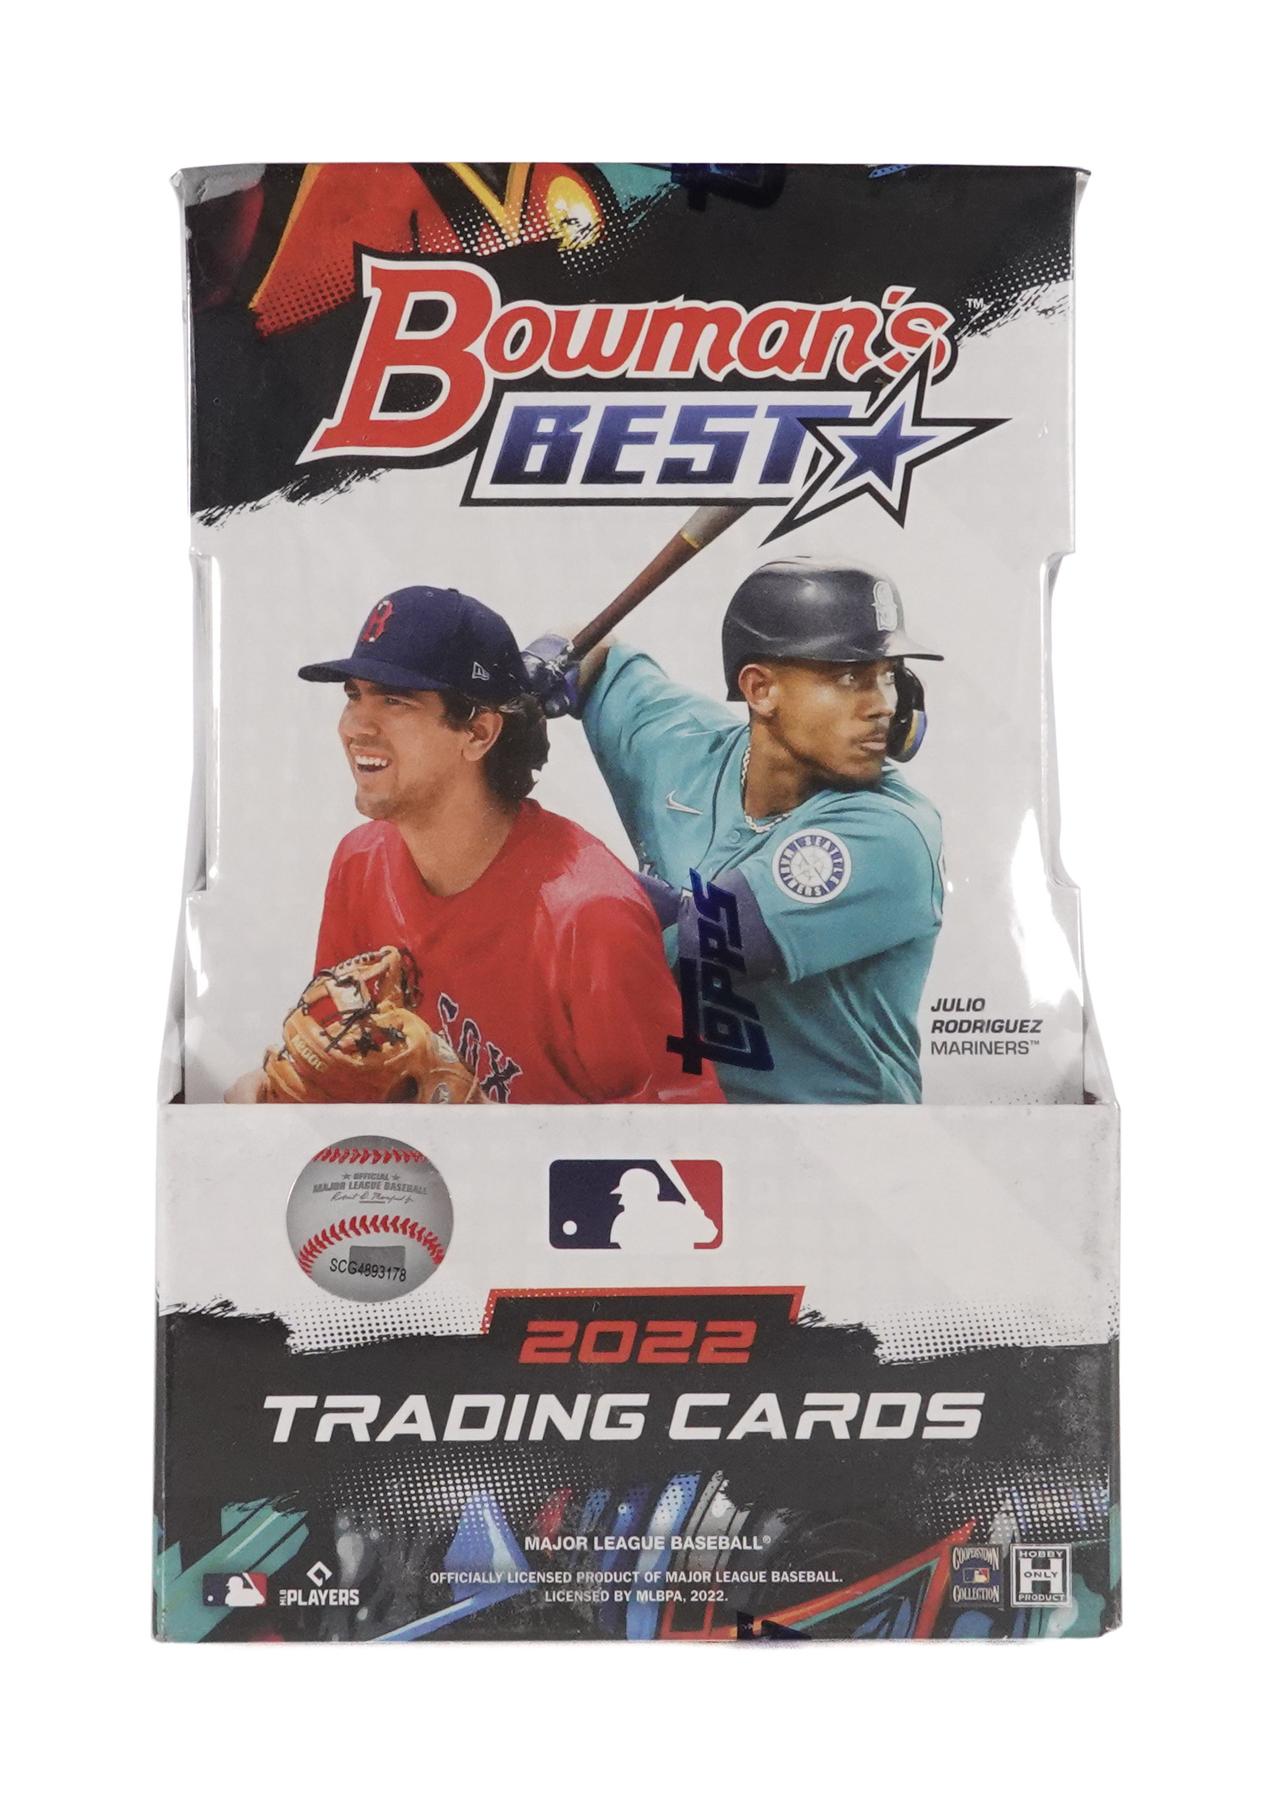 MY FAVORITE BOWMAN RELEASE!  2023 Bowman's Best MLB Hobby Box Review 